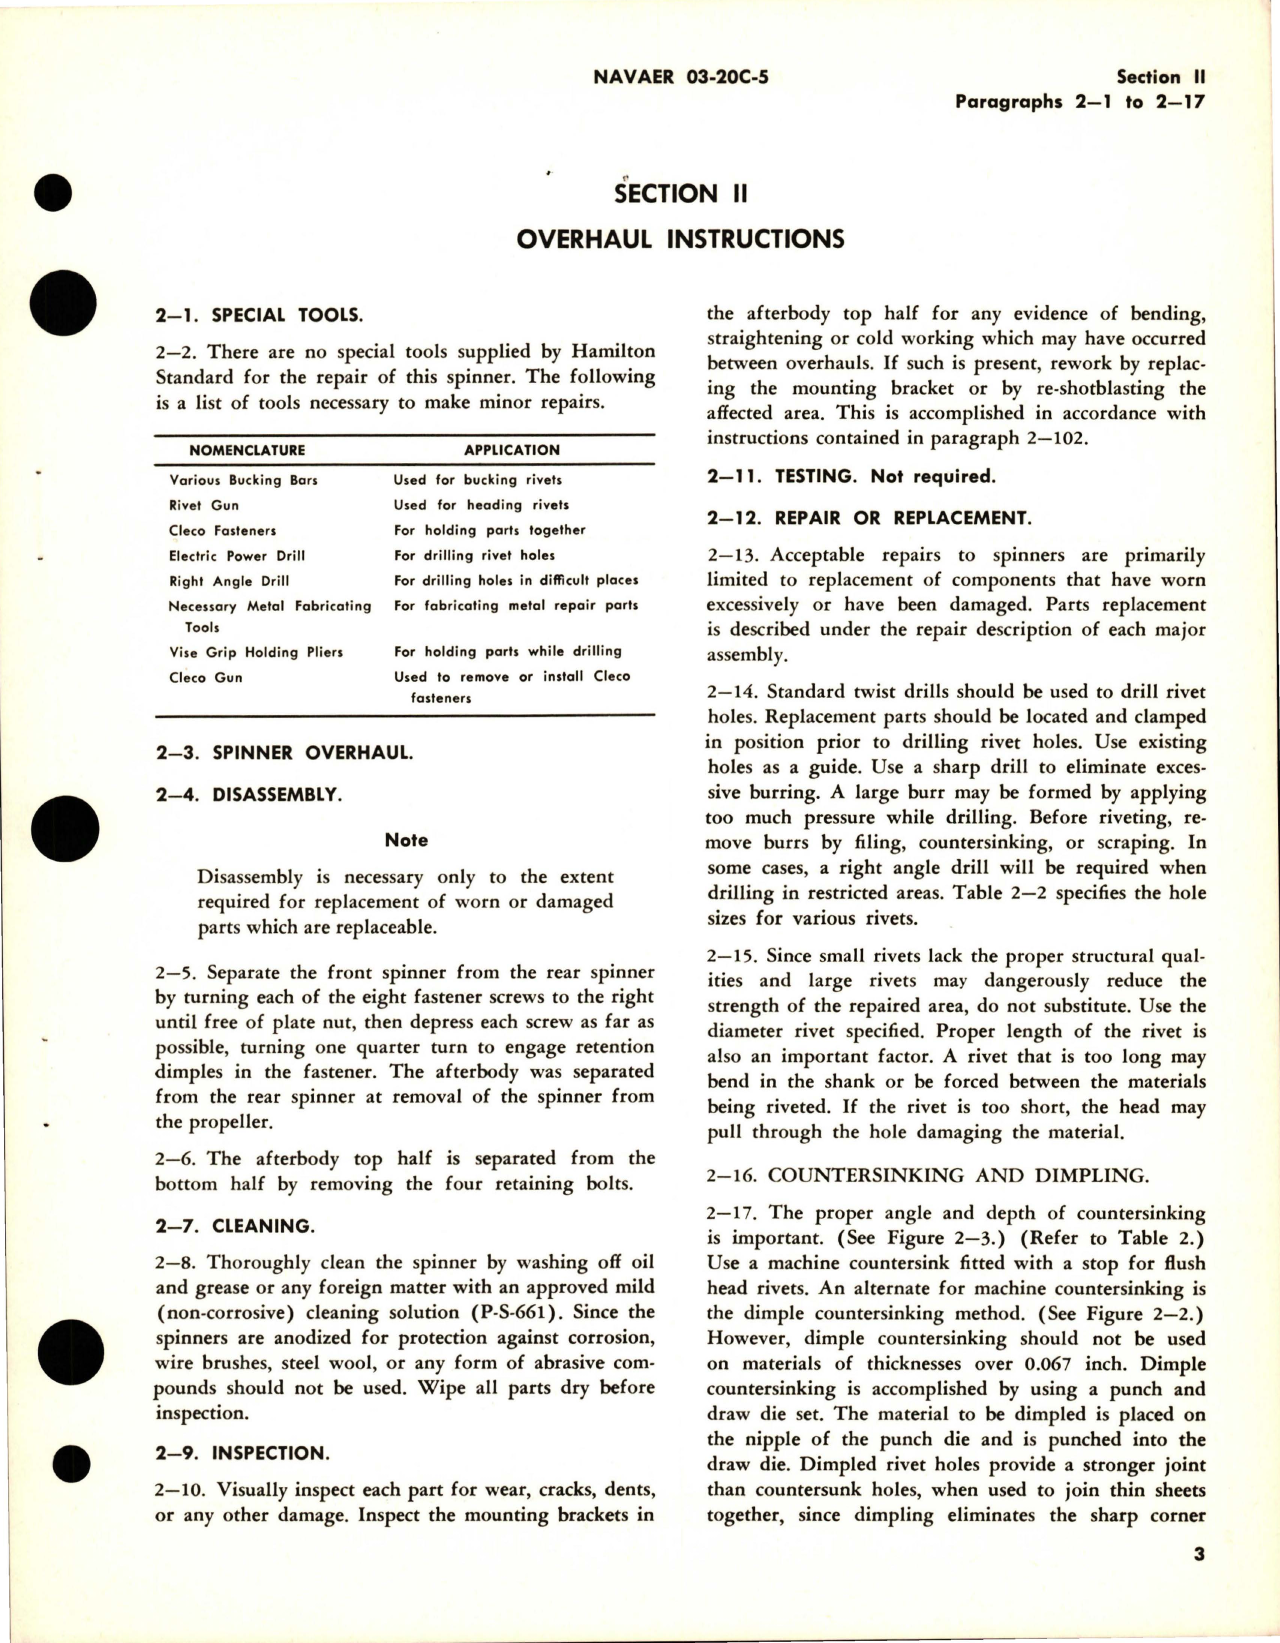 Sample page 7 from AirCorps Library document: Overhaul Instructions for Aircraft Propeller Spinner and Anti-Icing - Assembly 535247 